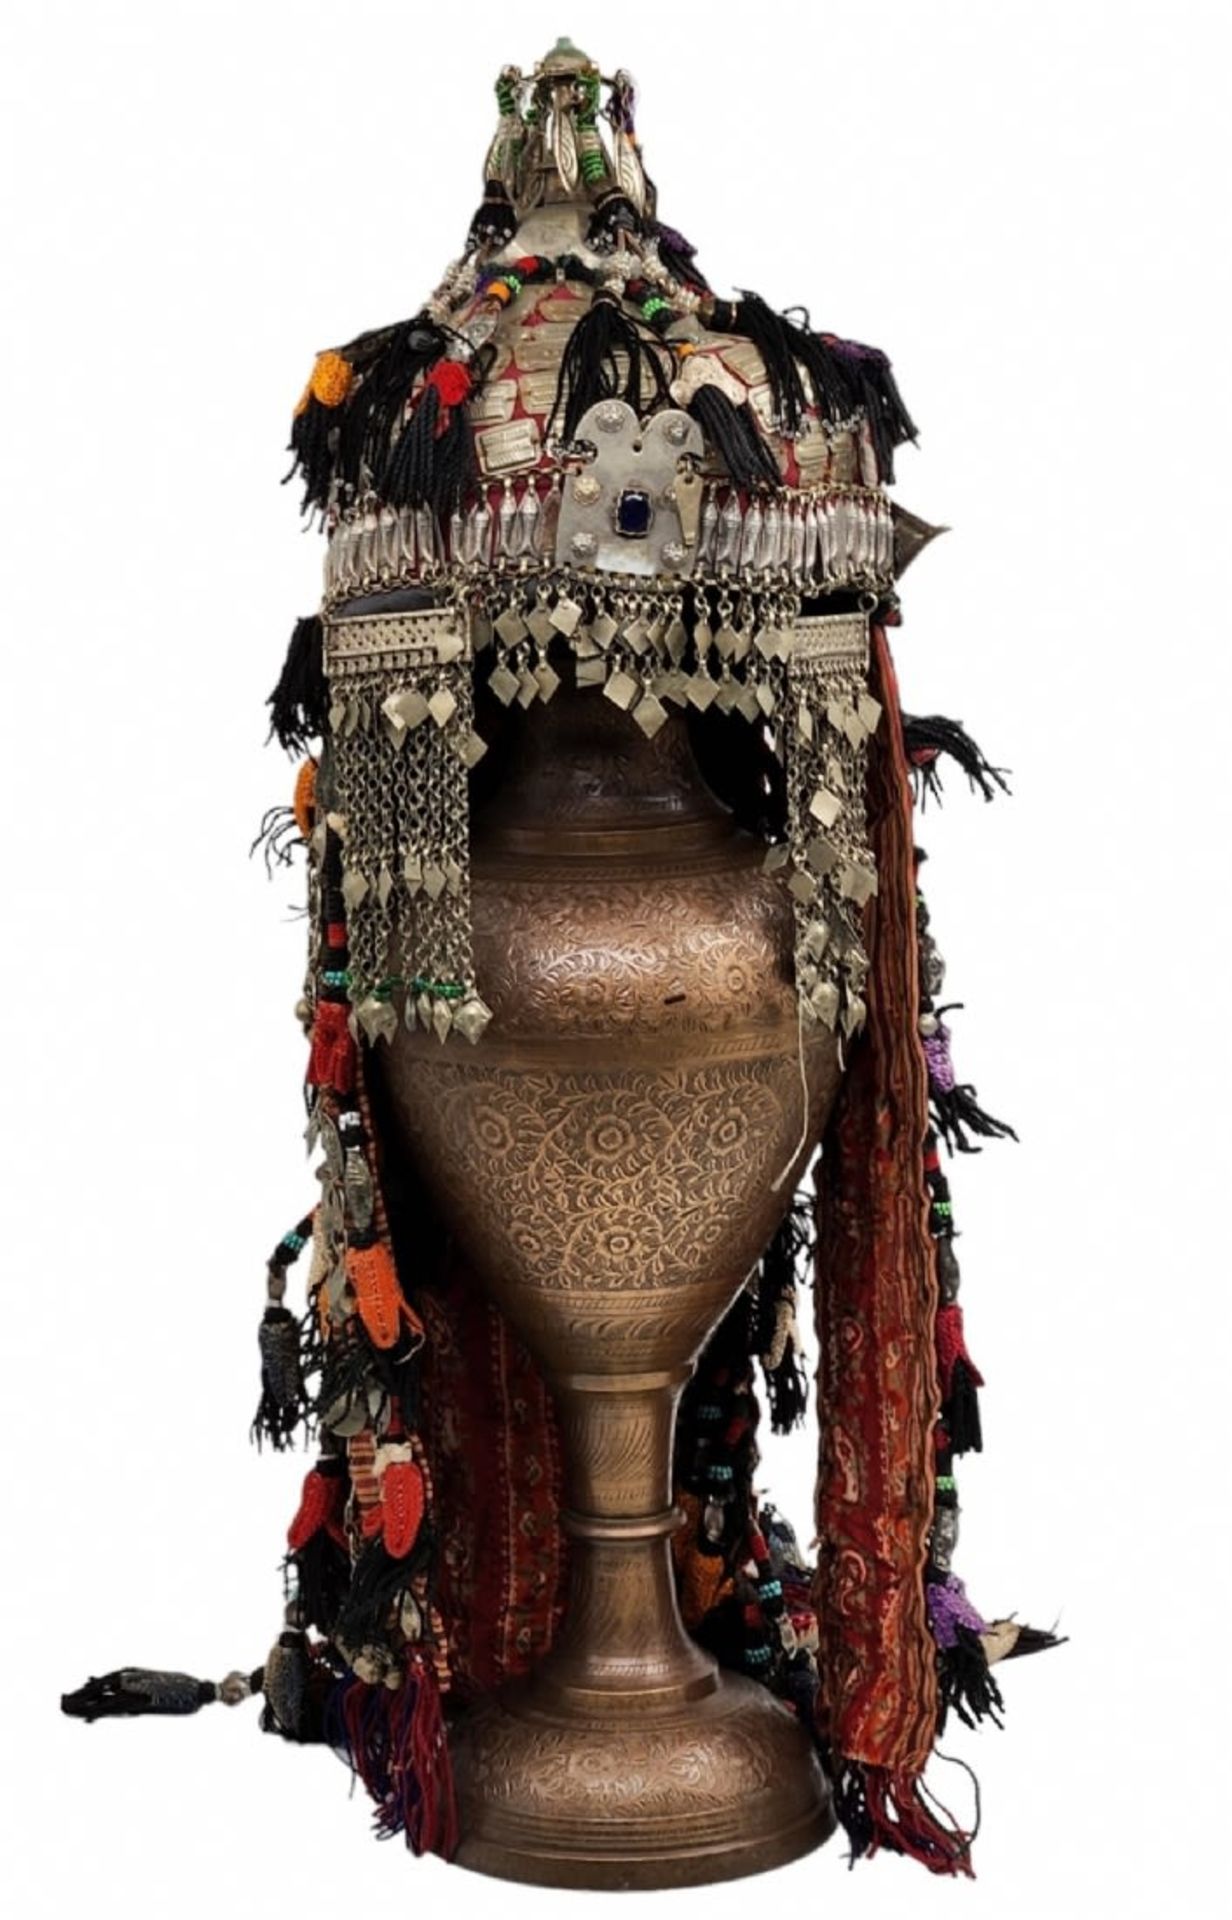 Antique Turkmen hat for a bride, 19th century, made of fabric decorated with hammered metal pieces - Image 2 of 4